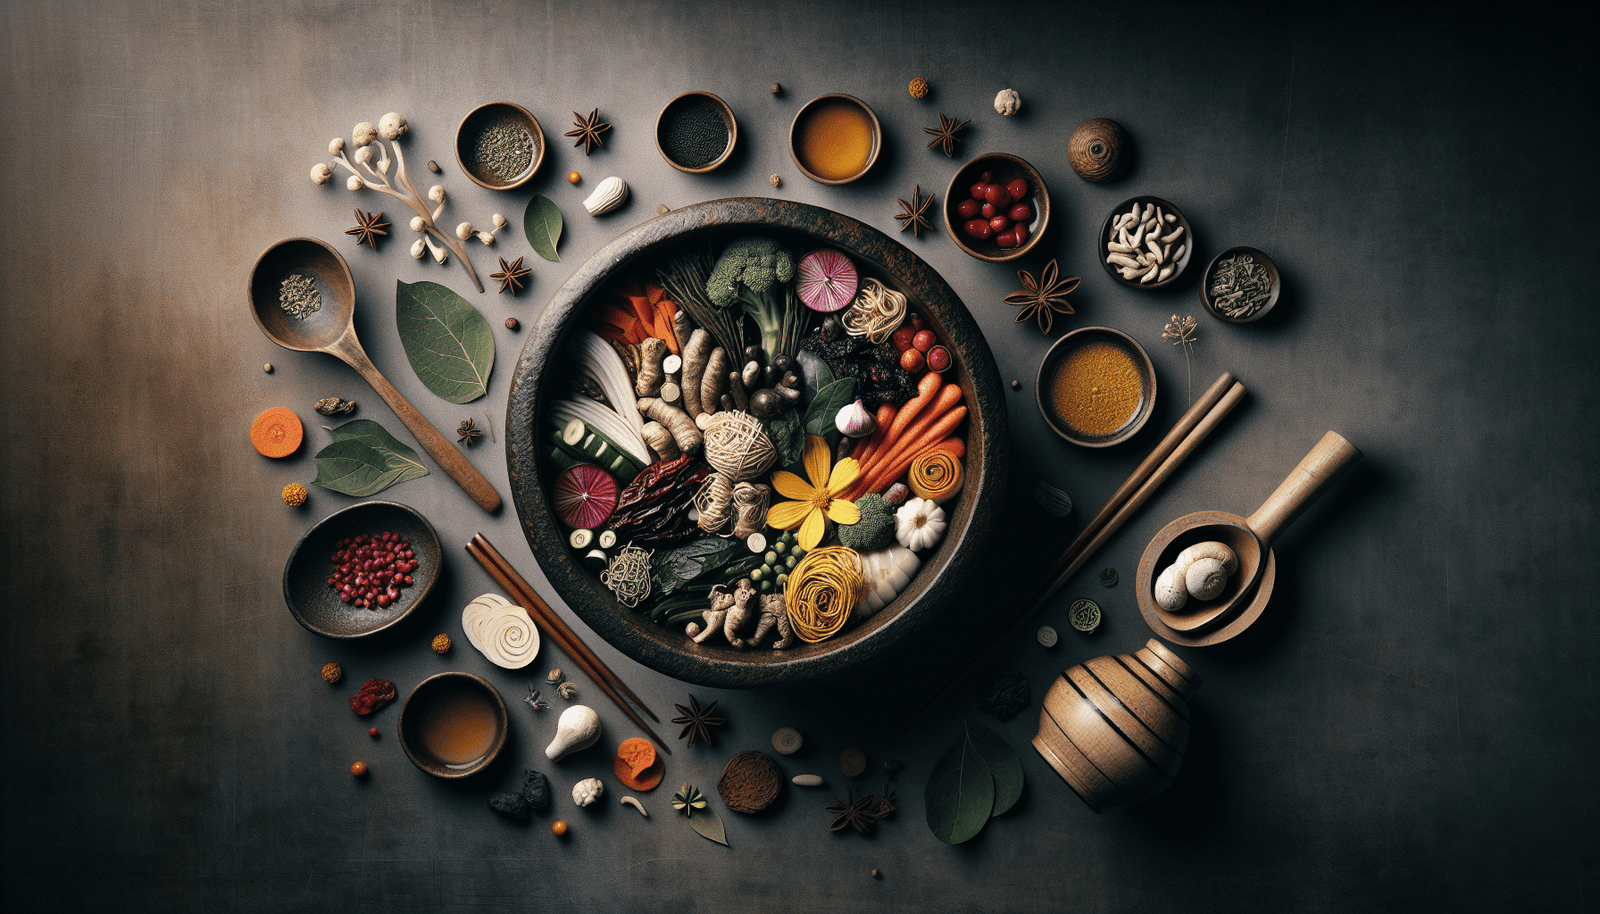 What Role Do Medicinal Herbs And Ingredients Play In Traditional Korean Cooking?